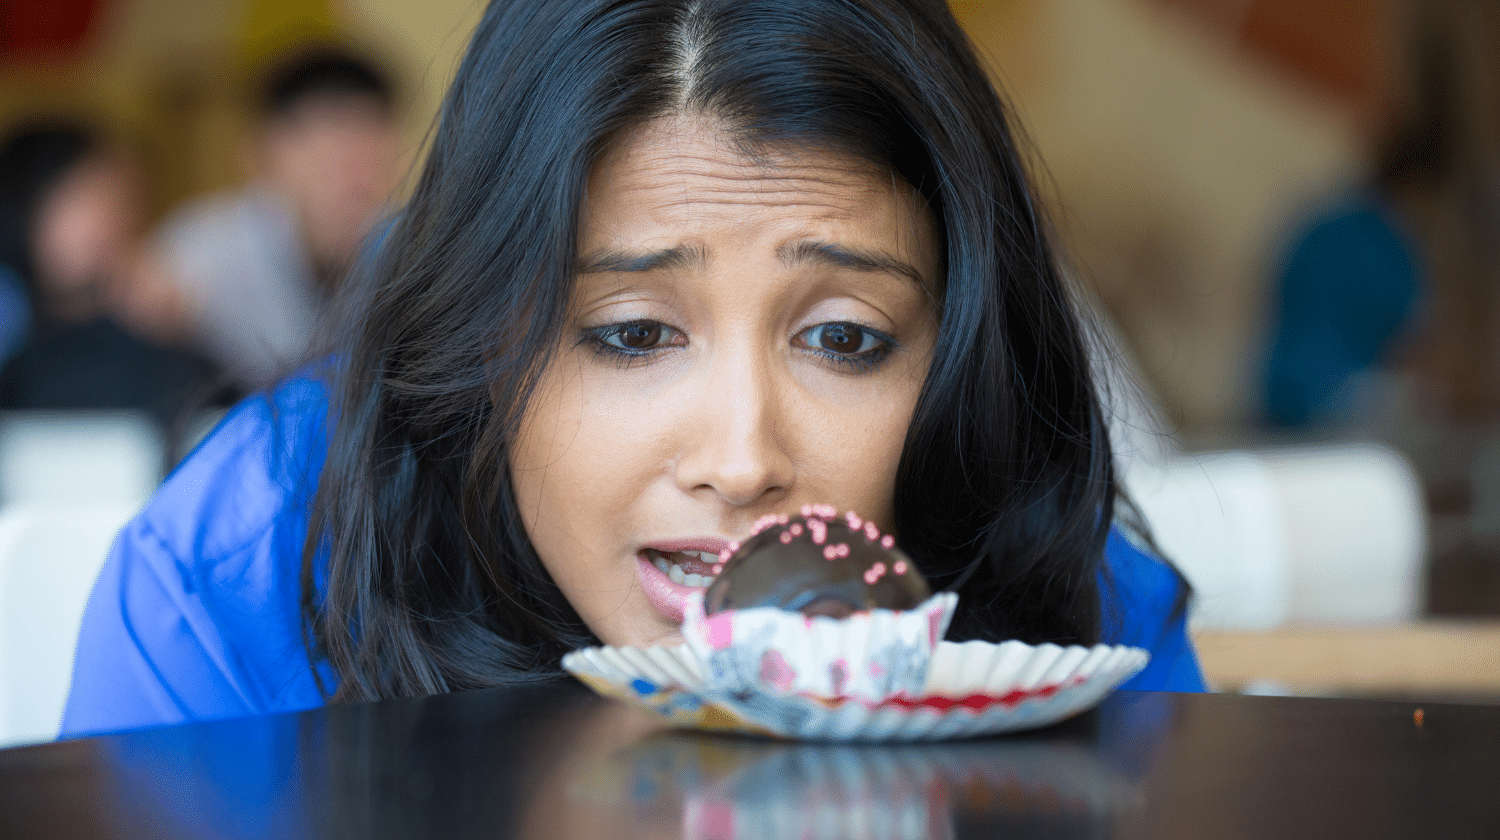 How To Stop Sugar Cravings